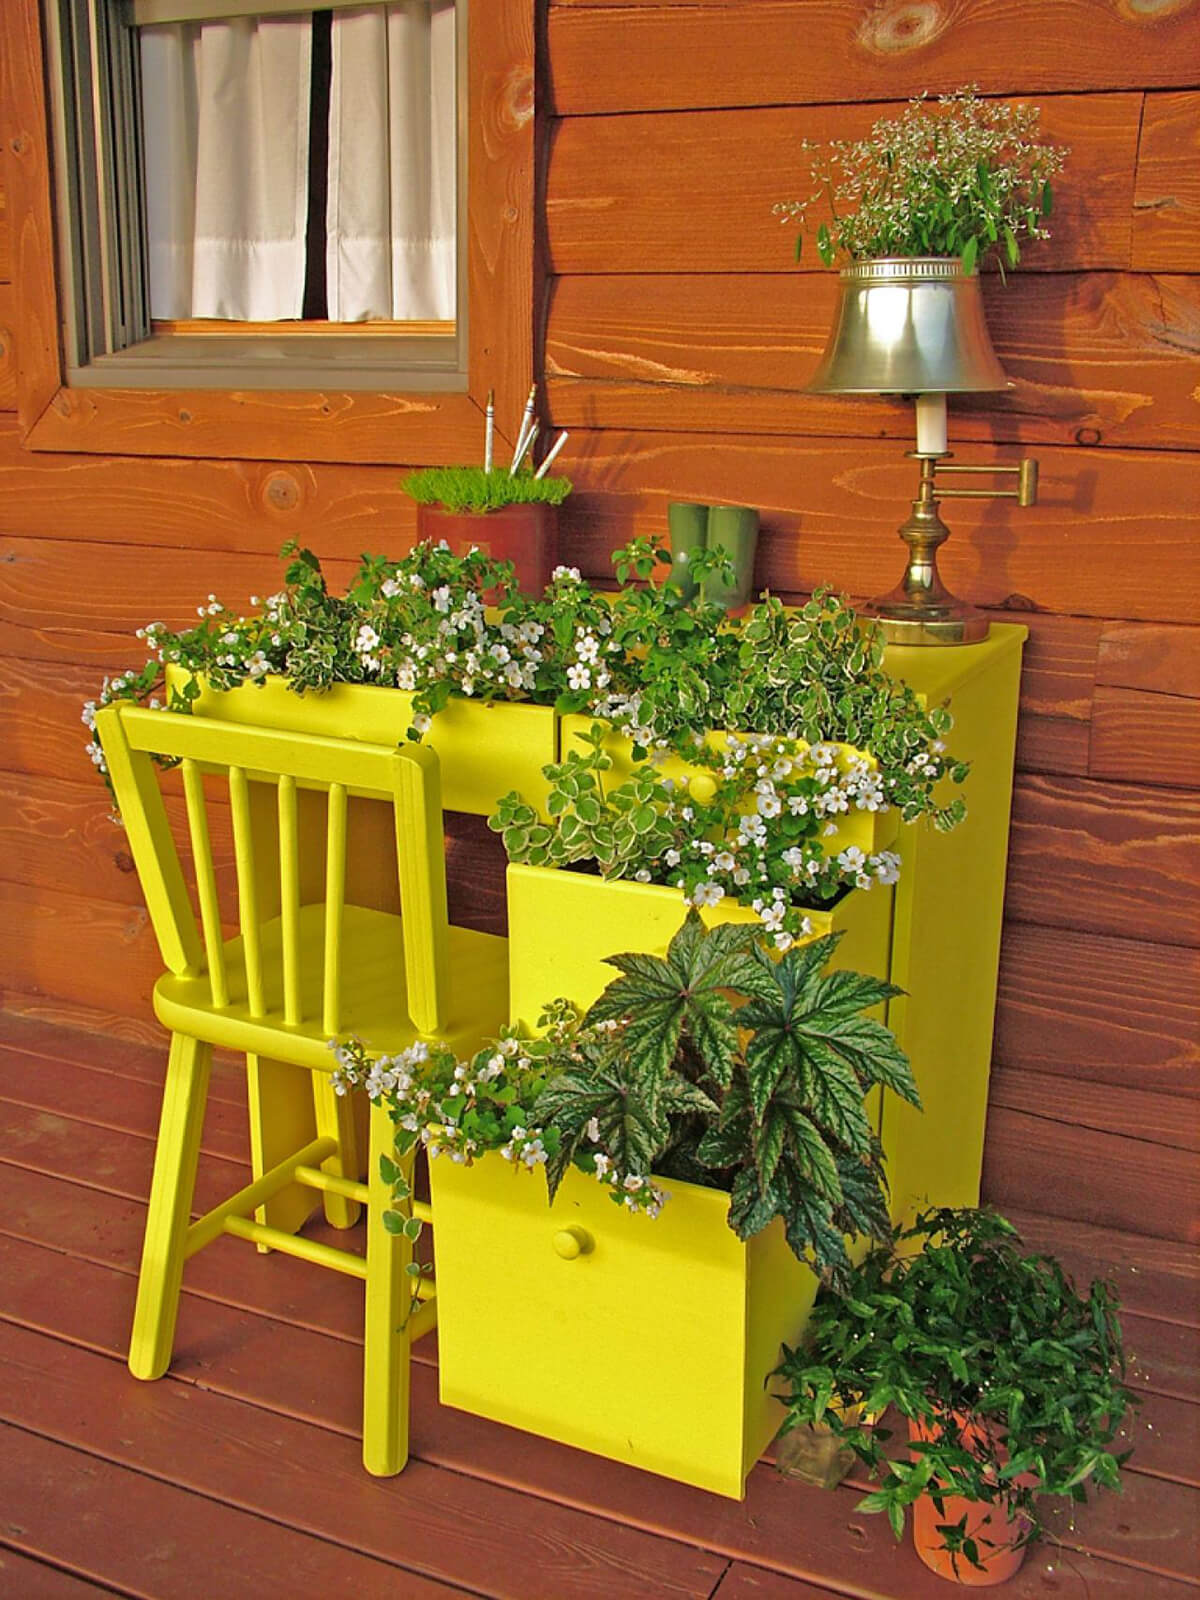 Upcycled Desk Garden Container for Your Porch